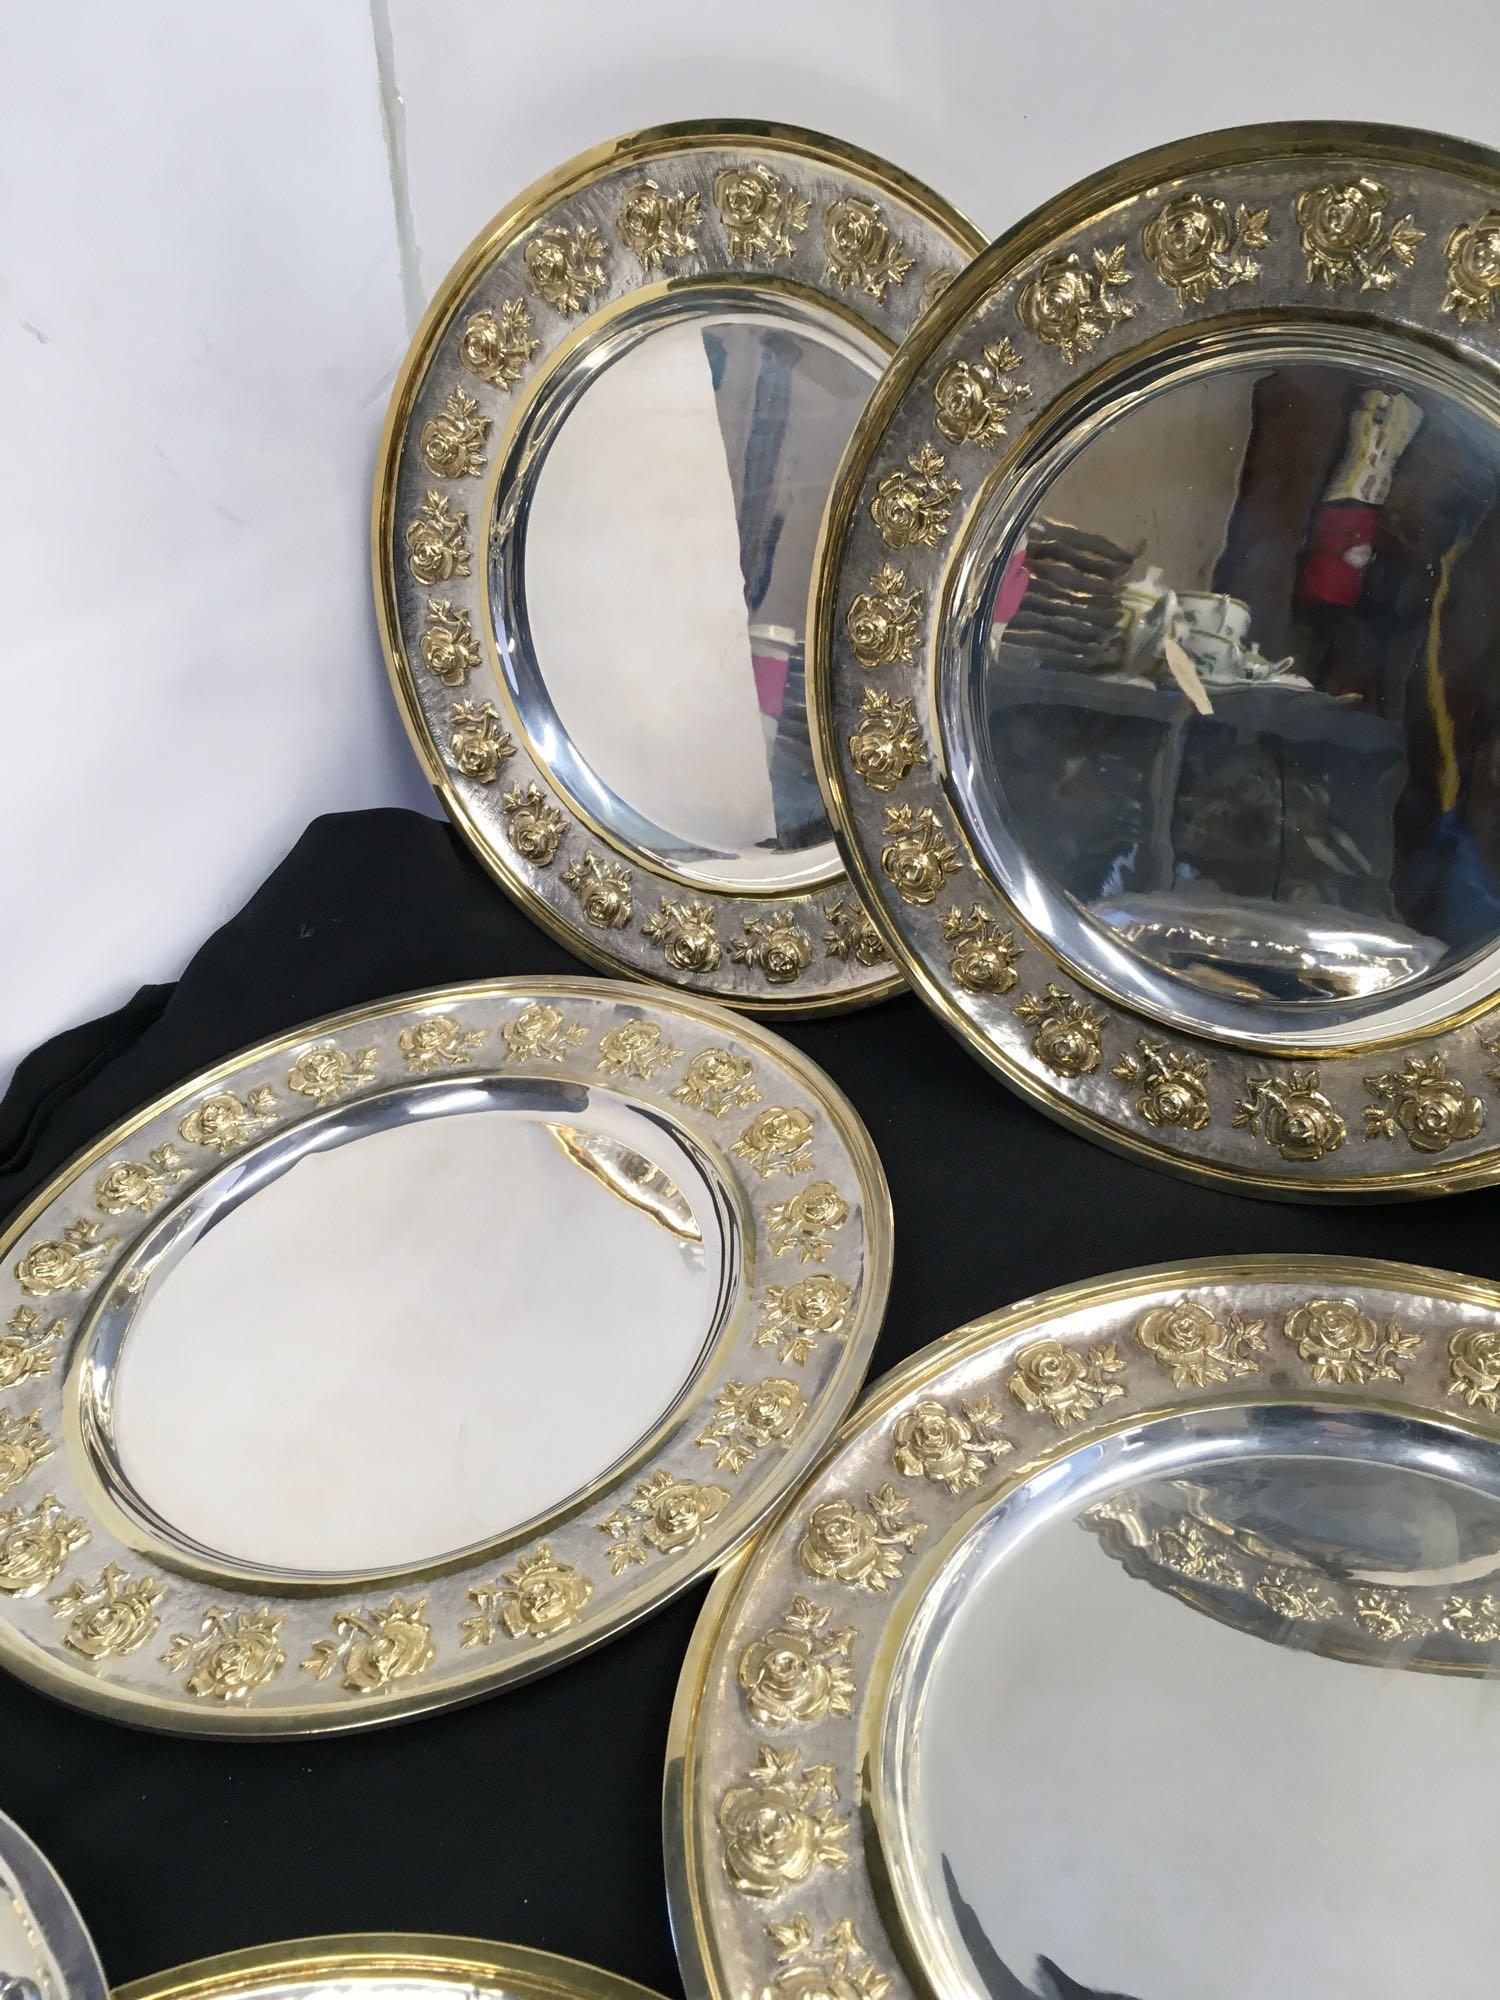 12 in. Sterling Silver ornate plates. Stamped with pic